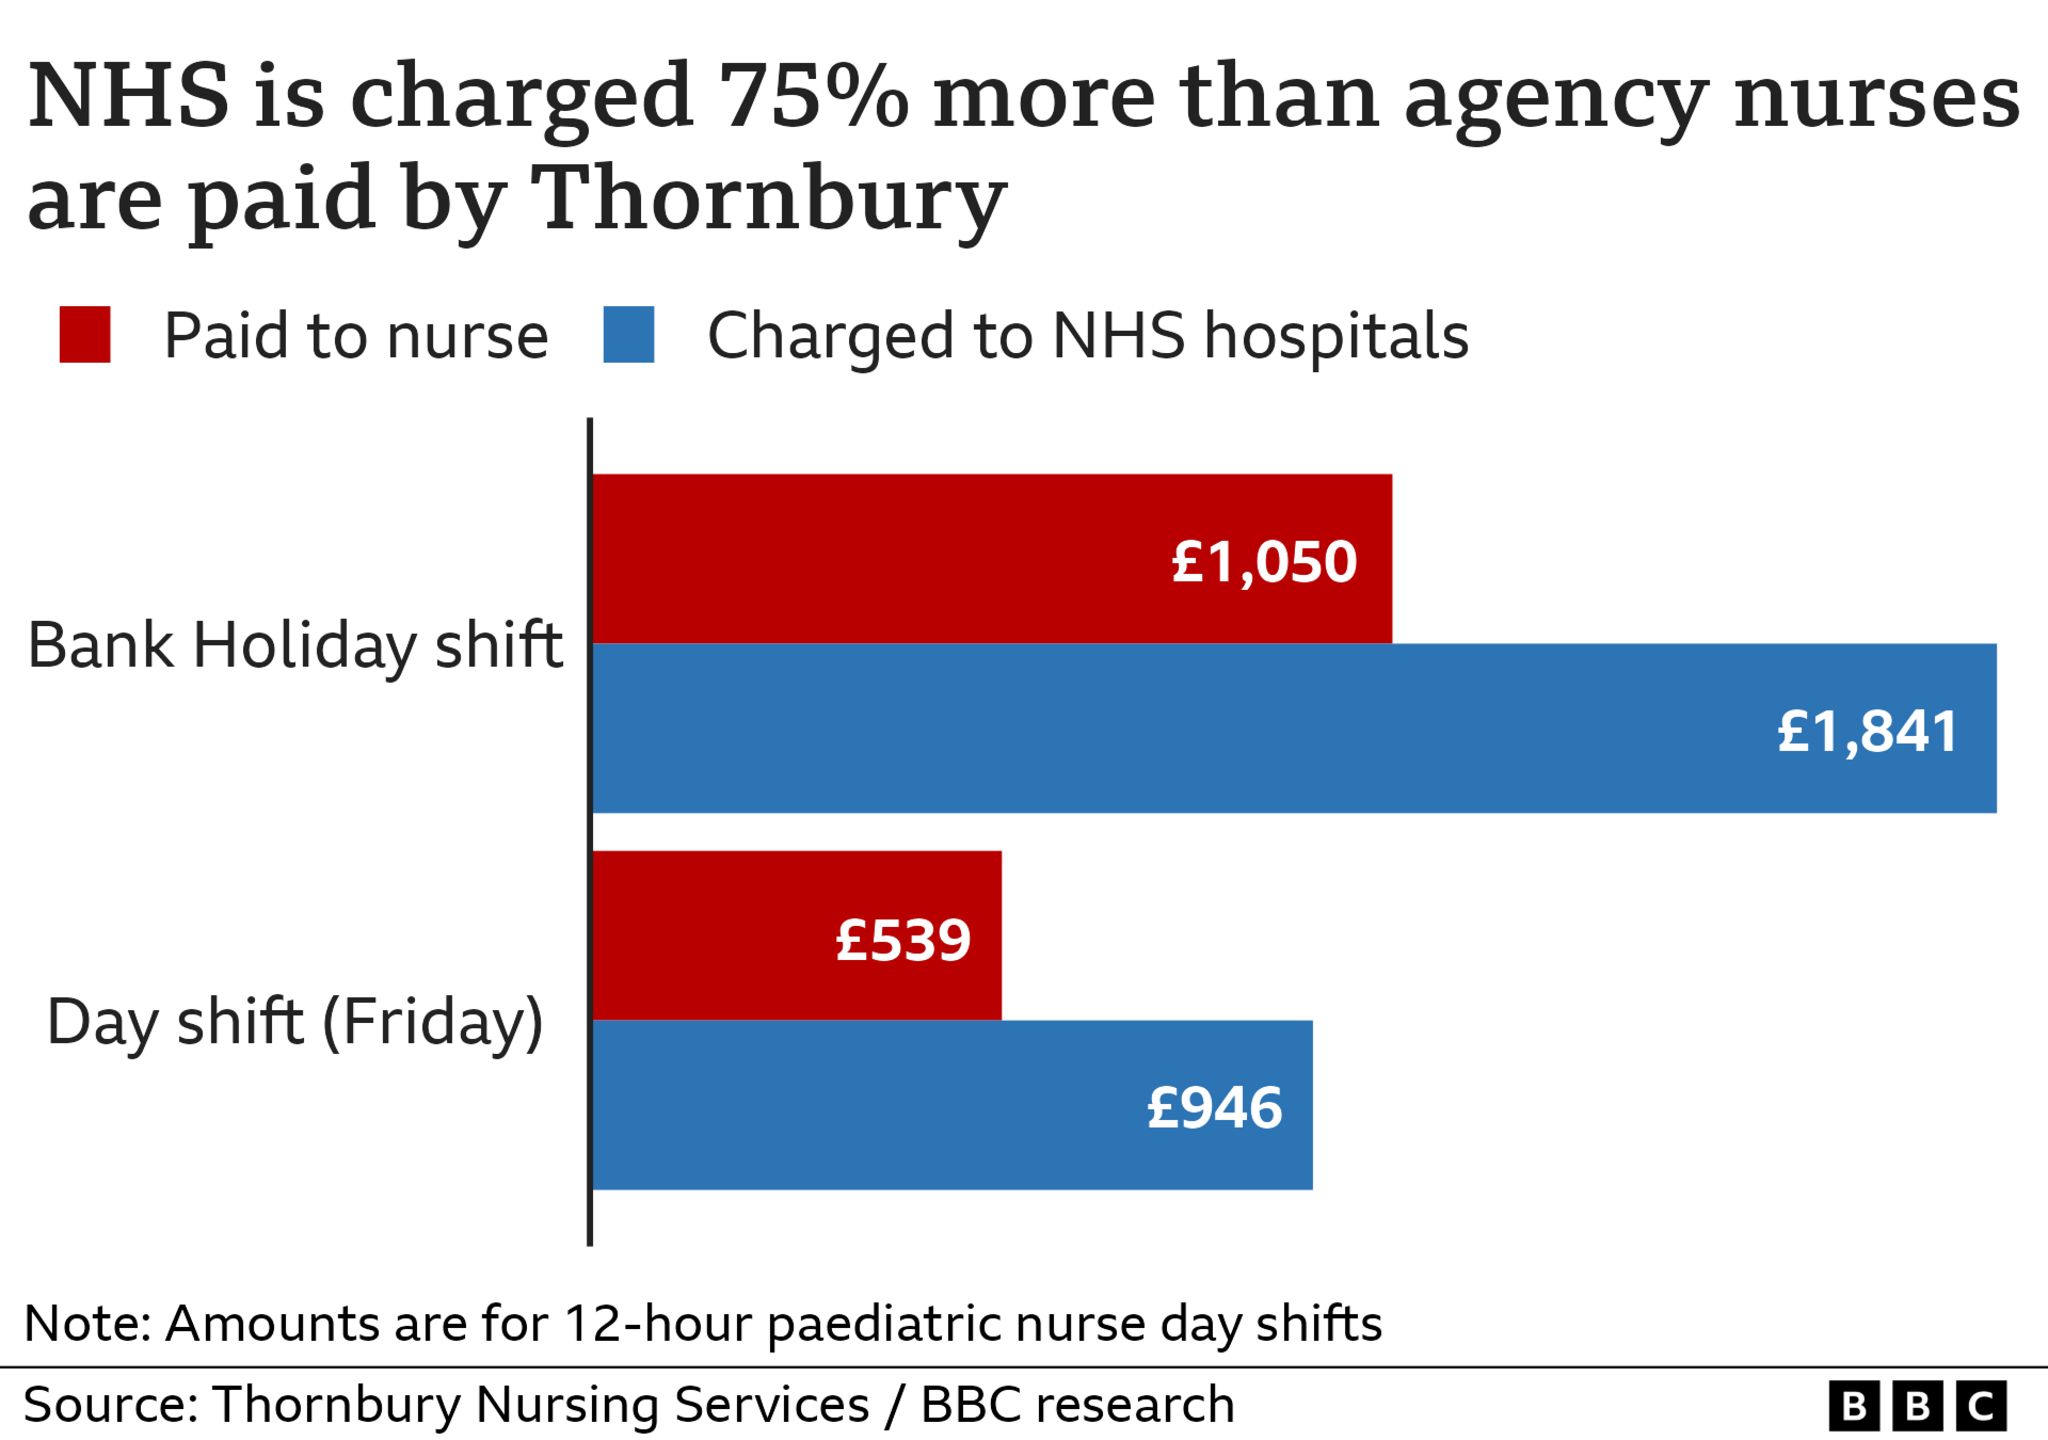 Amount charged to NHS and paid to nurse for agency shifts